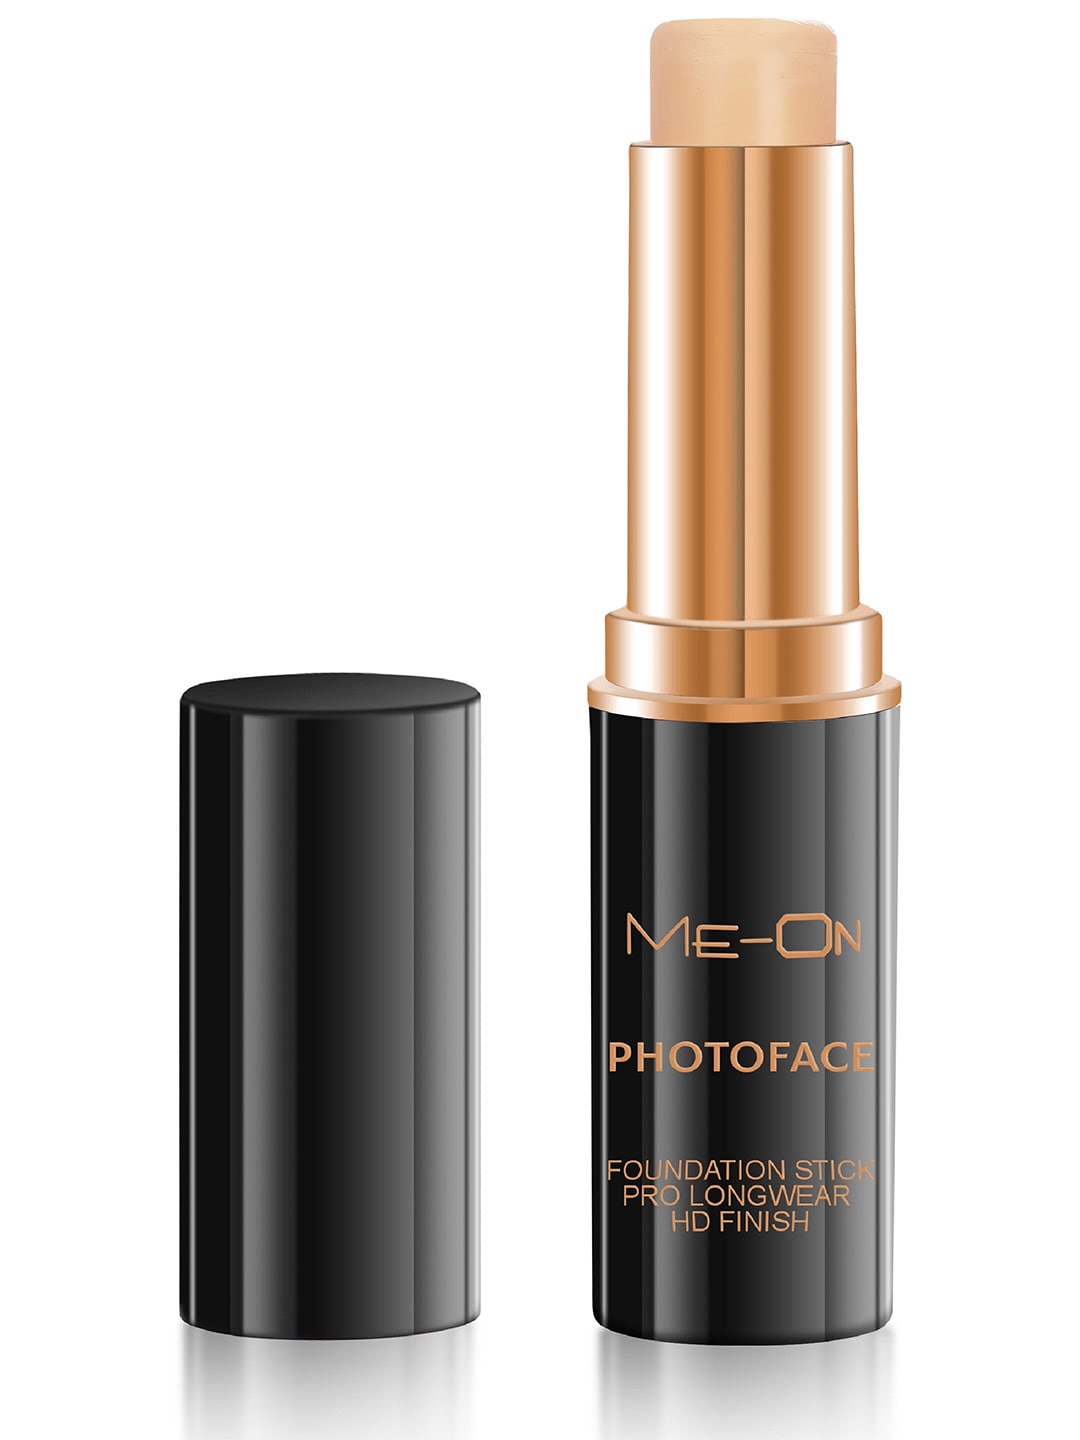 ME-ON Photoface Foundation Stick - shade 02 8 gm Price in India